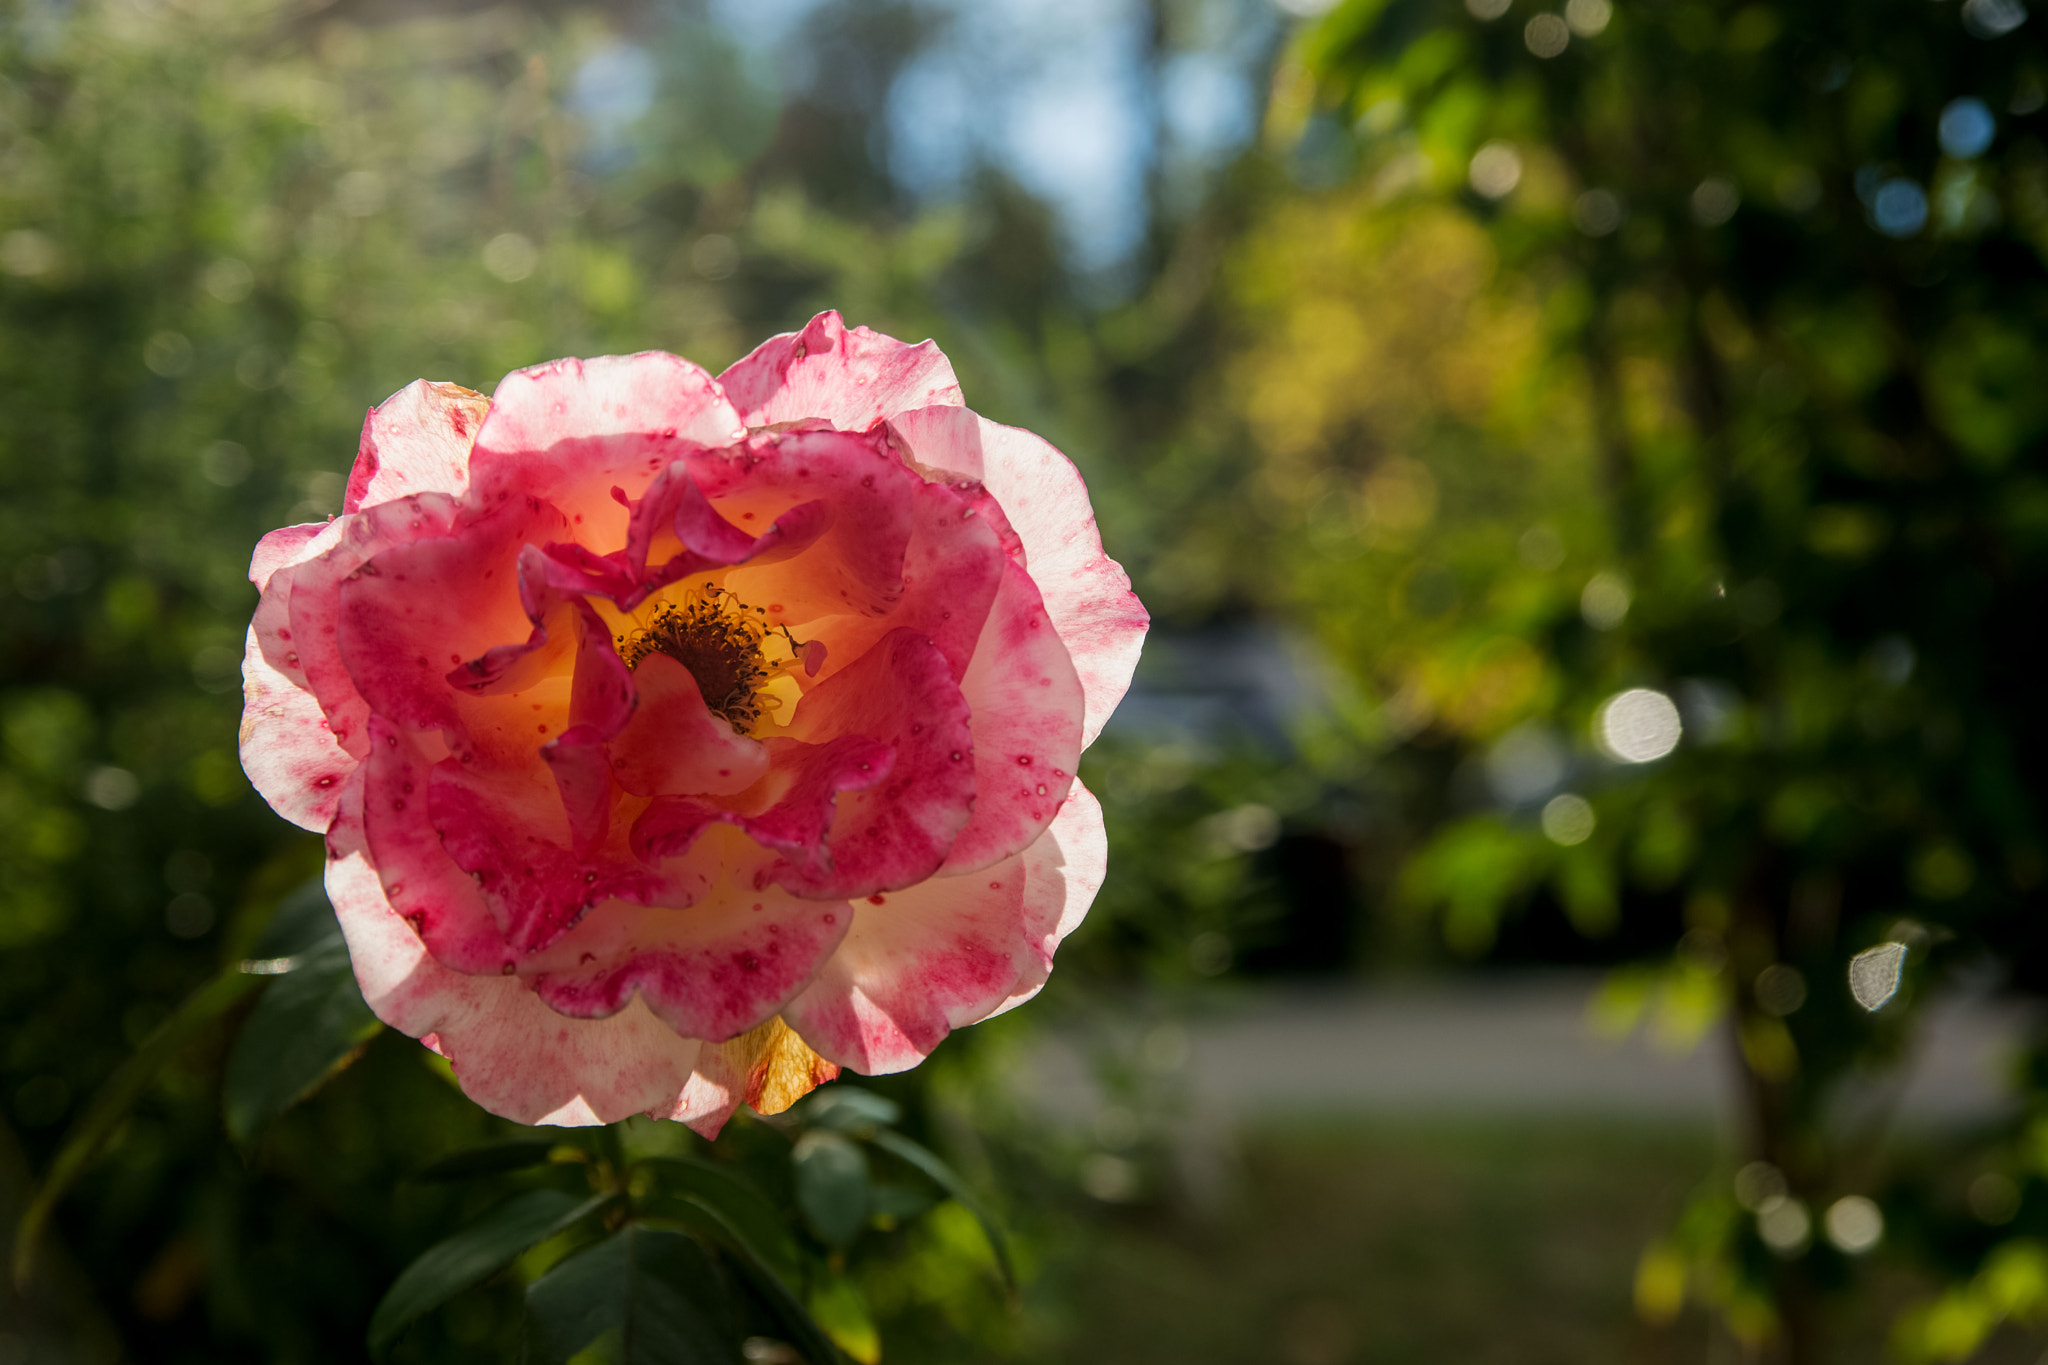 Sony a99 II sample photo. Portrait of a flower photography